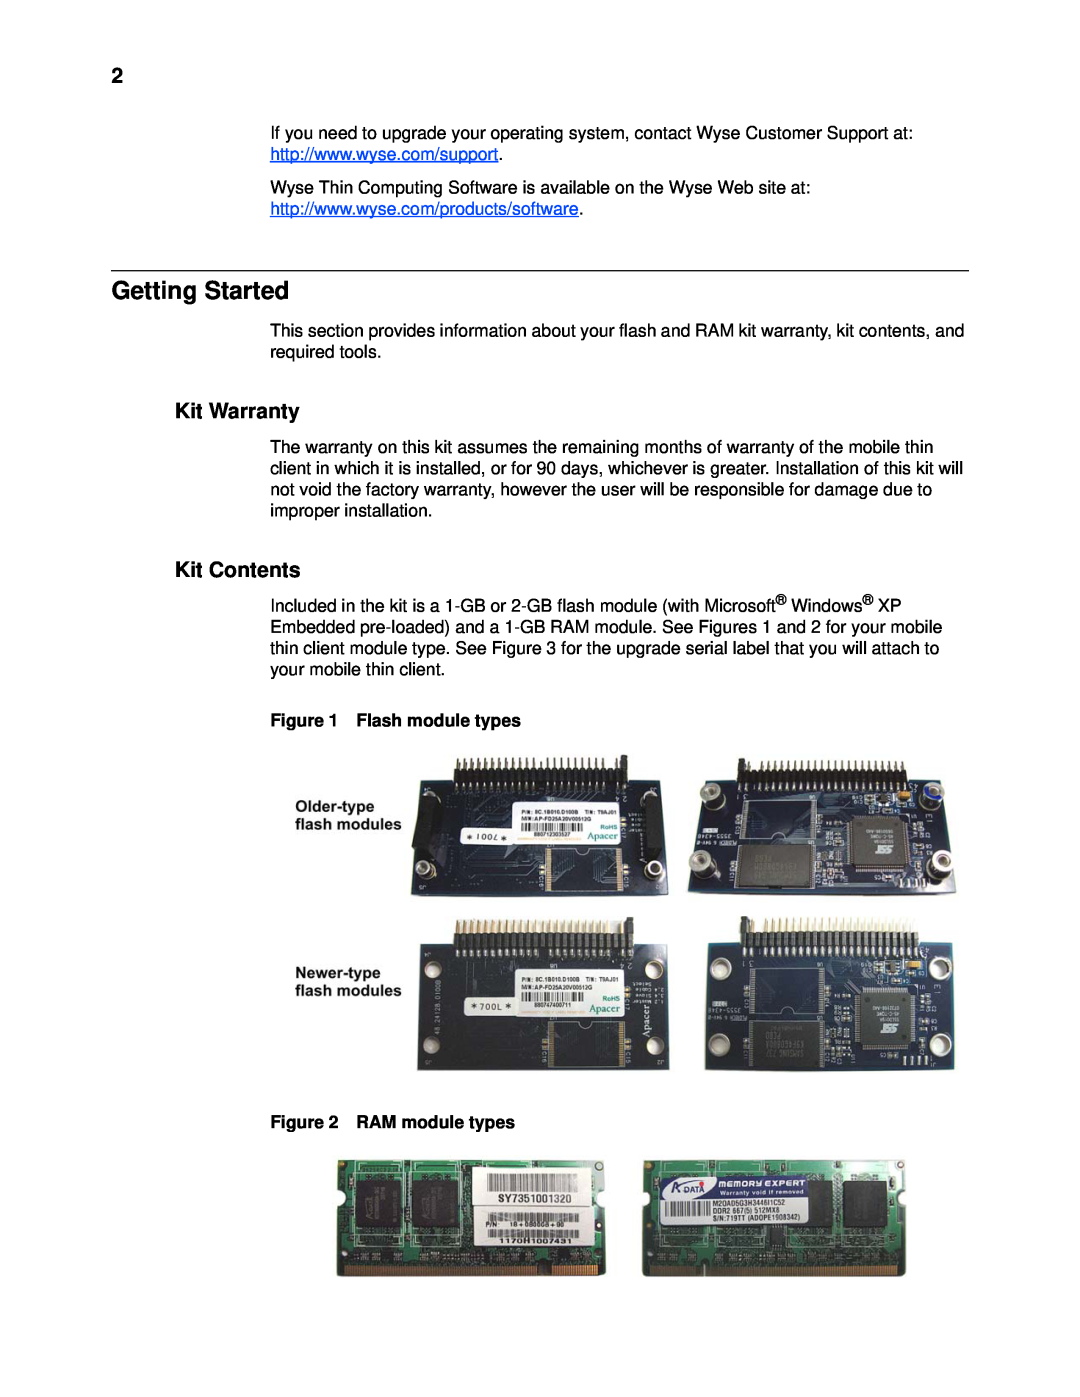 Wyse Technology X90e manual Getting Started, Kit Warranty, Kit Contents, Flash module types, RAM module types 